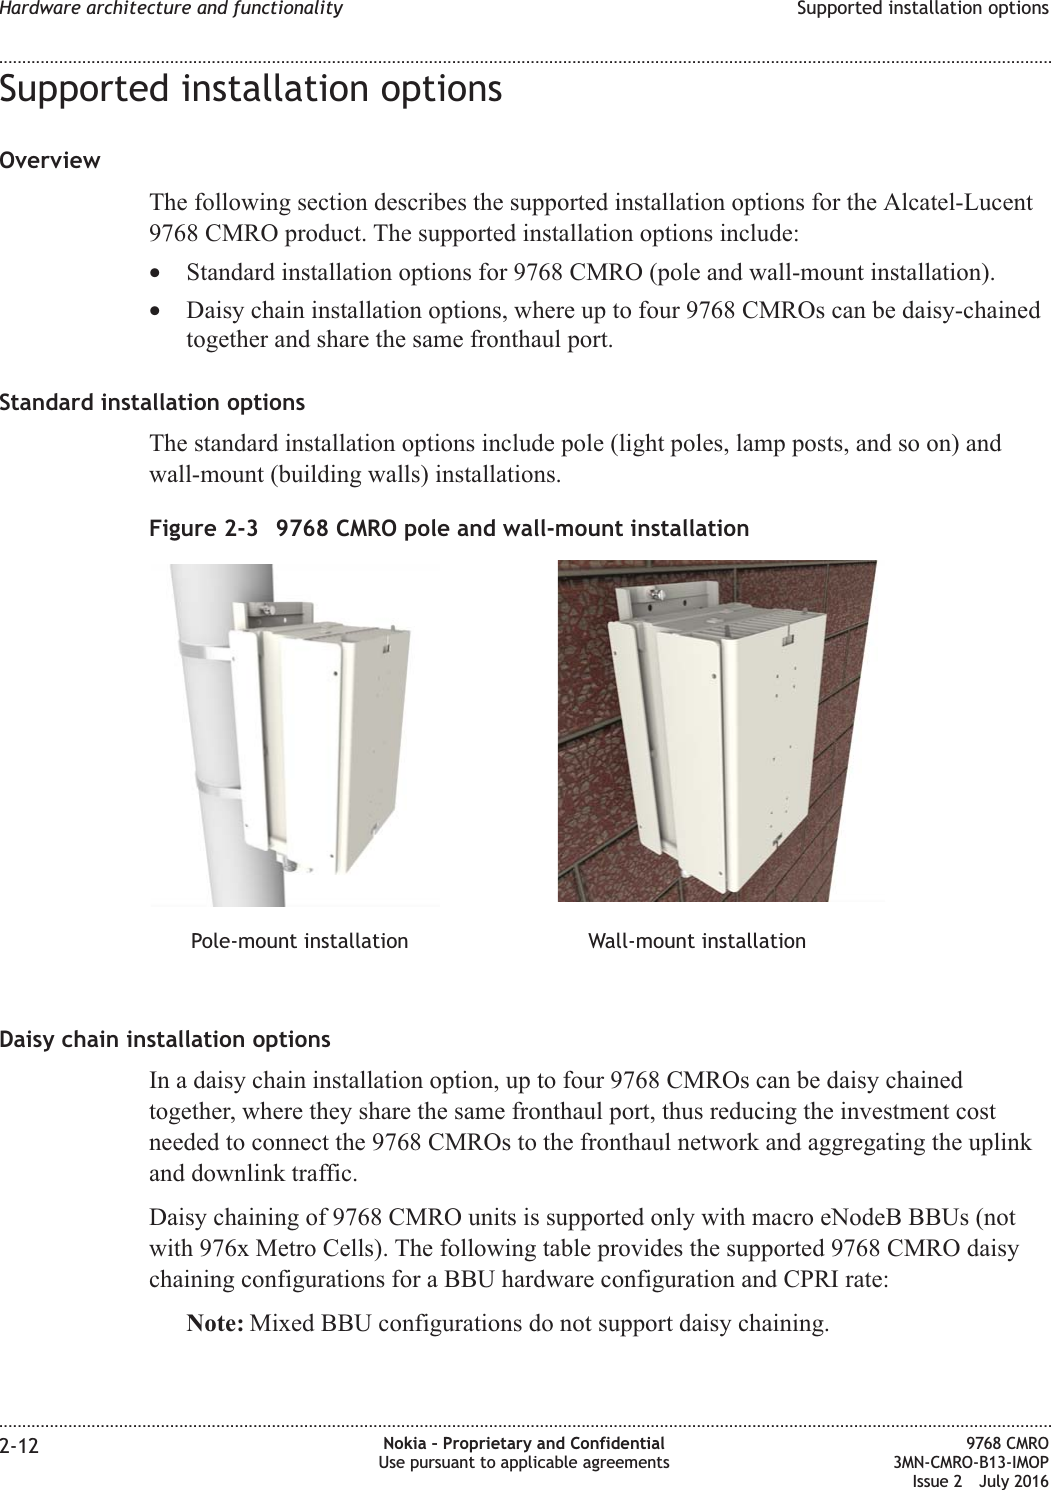 Supported installation optionsOverviewThe following section describes the supported installation options for the Alcatel-Lucent9768 CMRO product. The supported installation options include:•Standard installation options for 9768 CMRO (pole and wall-mount installation).•Daisy chain installation options, where up to four 9768 CMROs can be daisy-chainedtogether and share the same fronthaul port.Standard installation optionsThe standard installation options include pole (light poles, lamp posts, and so on) andwall-mount (building walls) installations.Daisy chain installation optionsIn a daisy chain installation option, up to four 9768 CMROs can be daisy chainedtogether, where they share the same fronthaul port, thus reducing the investment costneeded to connect the 9768 CMROs to the fronthaul network and aggregating the uplinkand downlink traffic.Daisy chaining of 9768 CMRO units is supported only with macro eNodeB BBUs (notwith 976x Metro Cells). The following table provides the supported 9768 CMRO daisychaining configurations for a BBU hardware configuration and CPRI rate:Note: Mixed BBU configurations do not support daisy chaining.Figure 2-3 9768 CMRO pole and wall-mount installationPole-mount installation Wall-mount installationHardware architecture and functionality Supported installation options........................................................................................................................................................................................................................................................................................................................................................................................................................................................................2-12 Nokia – Proprietary and ConfidentialUse pursuant to applicable agreements9768 CMRO3MN-CMRO-B13-IMOPIssue 2 July 2016FCC FILING FCC FILING